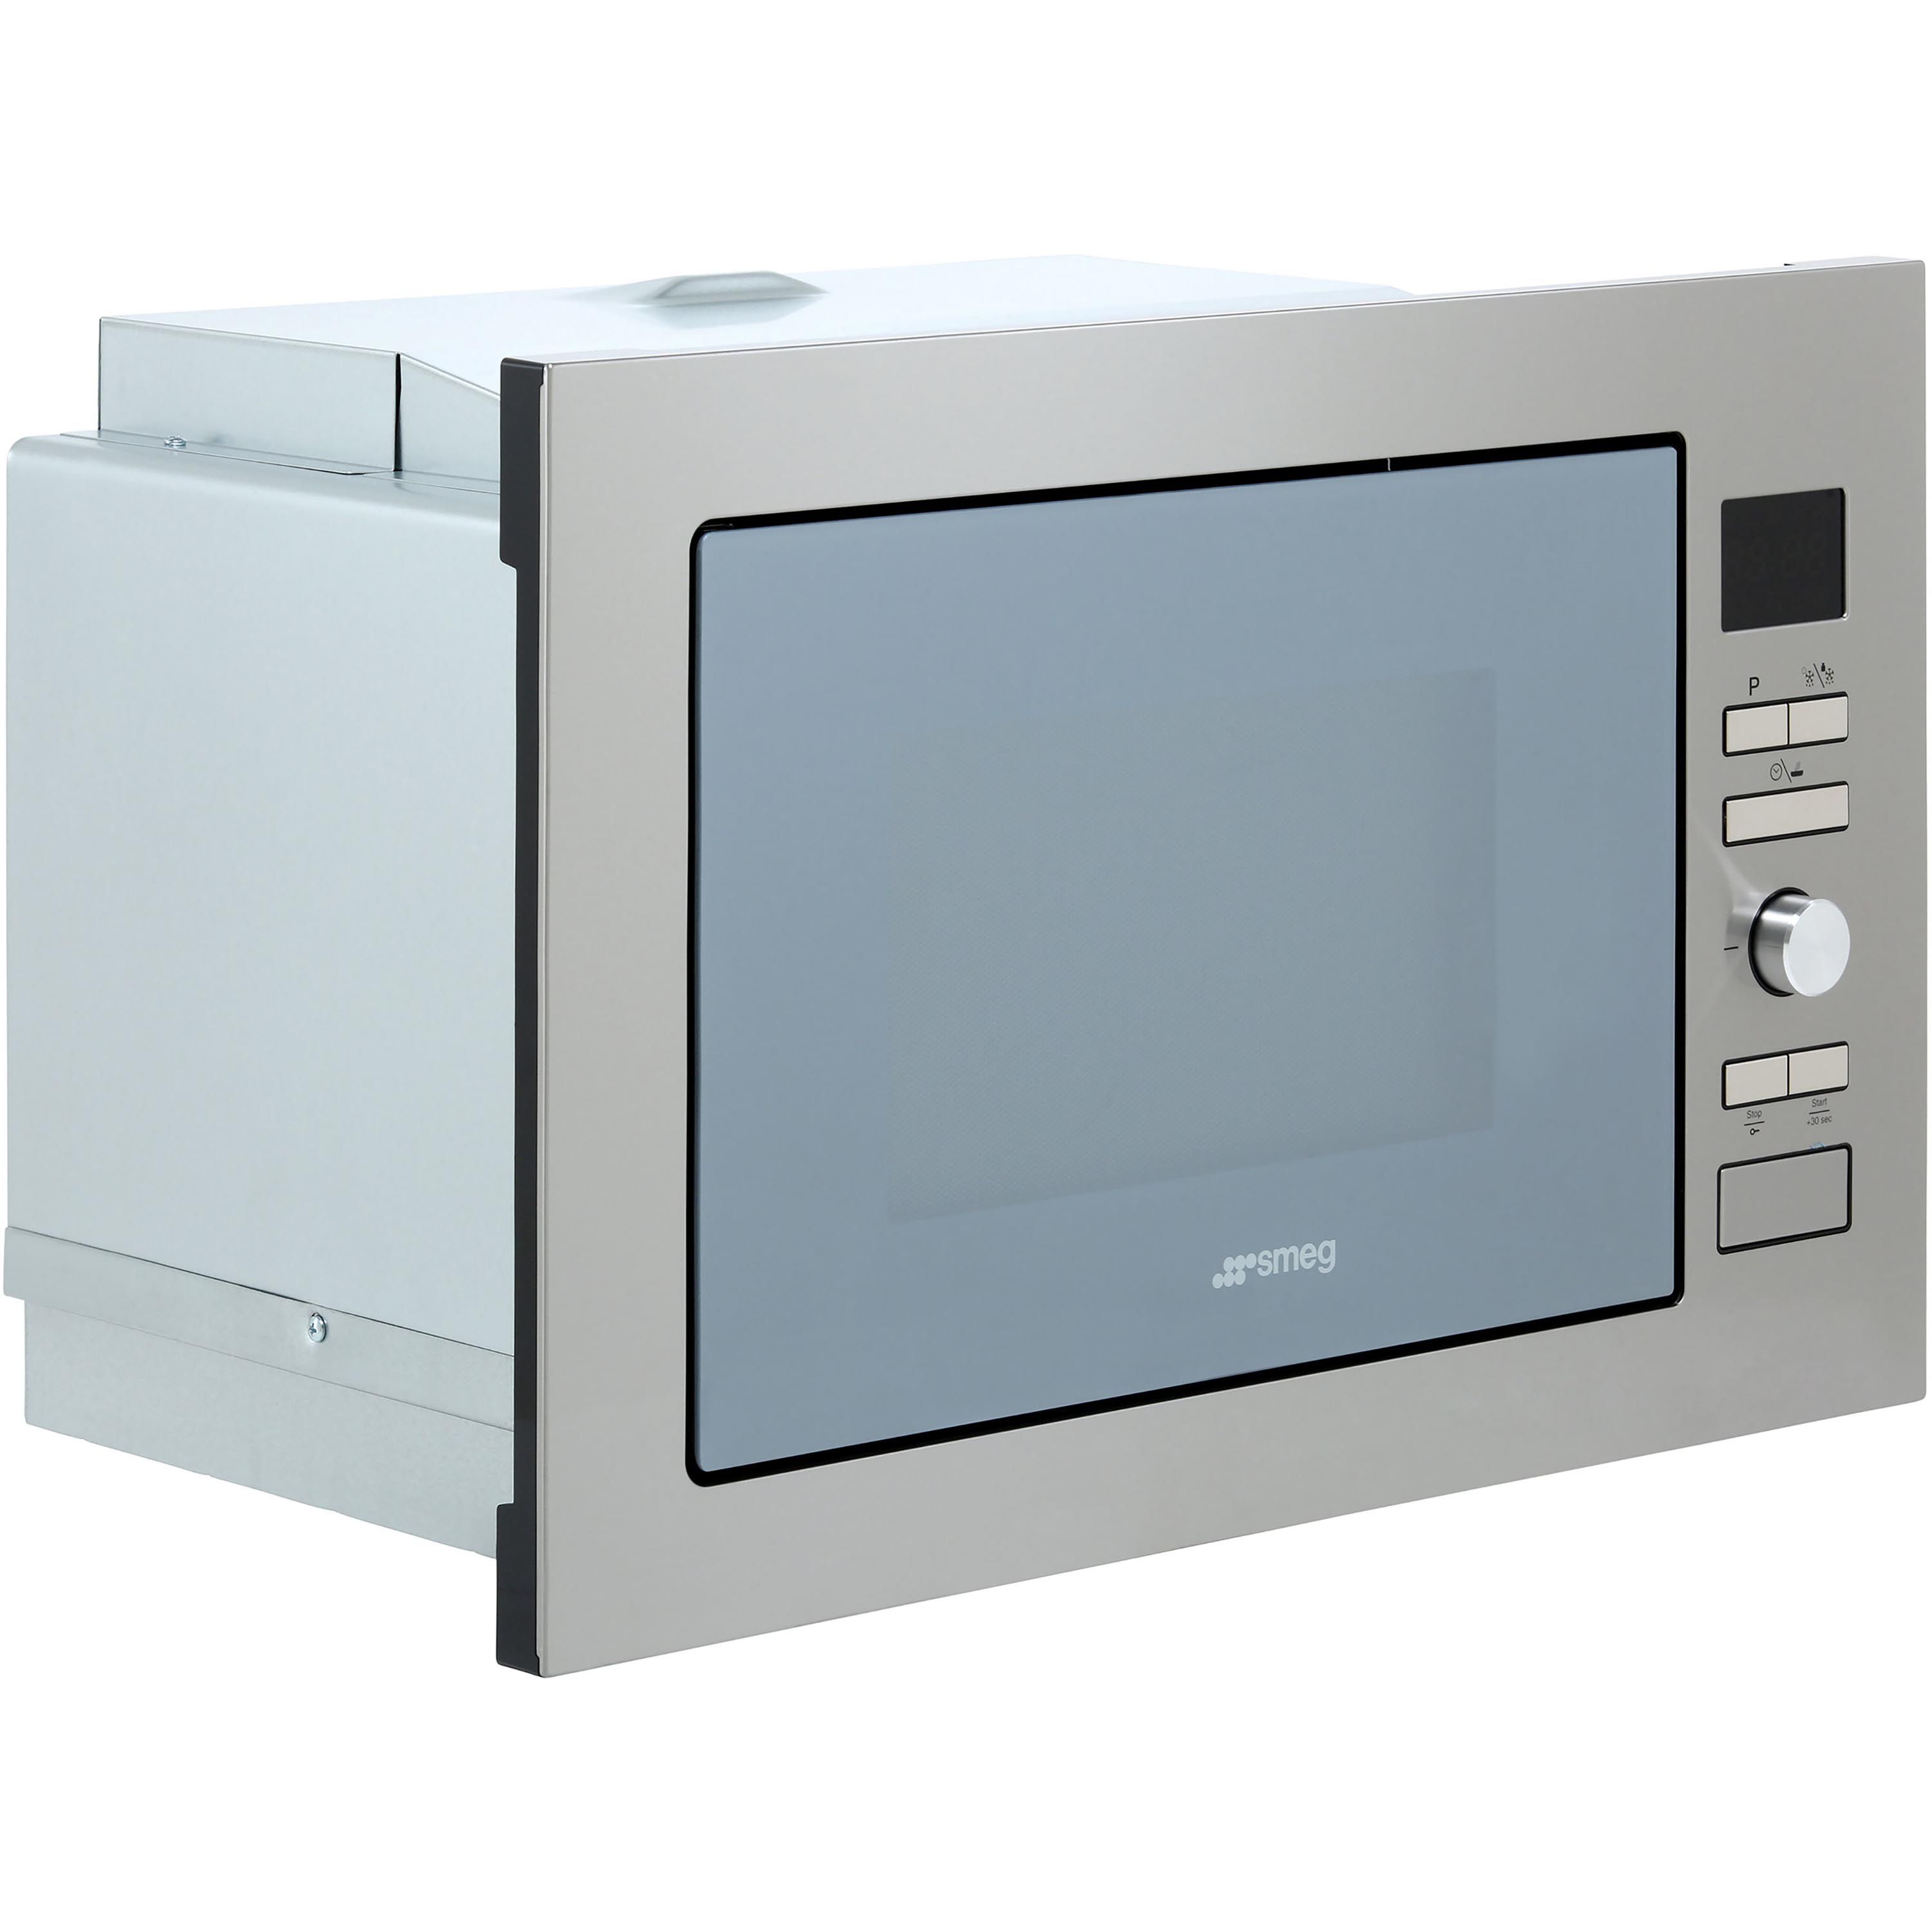 Smeg FMI425S_SG Built-in Microwave with grill - Stainless steel